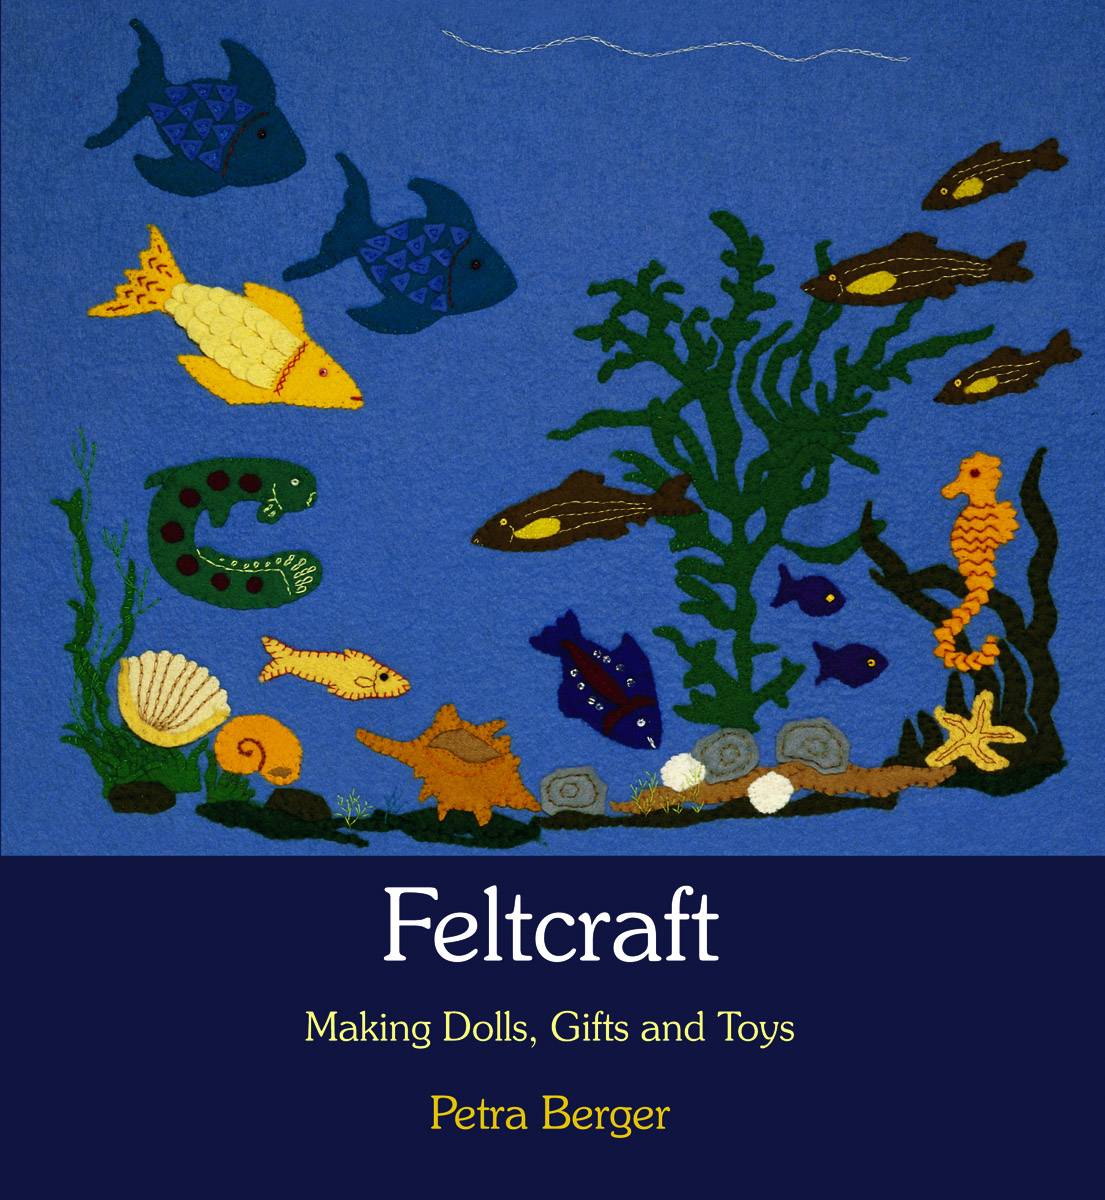 Felcraft , Making dolls,gifts and Toys-Berger Old Edition